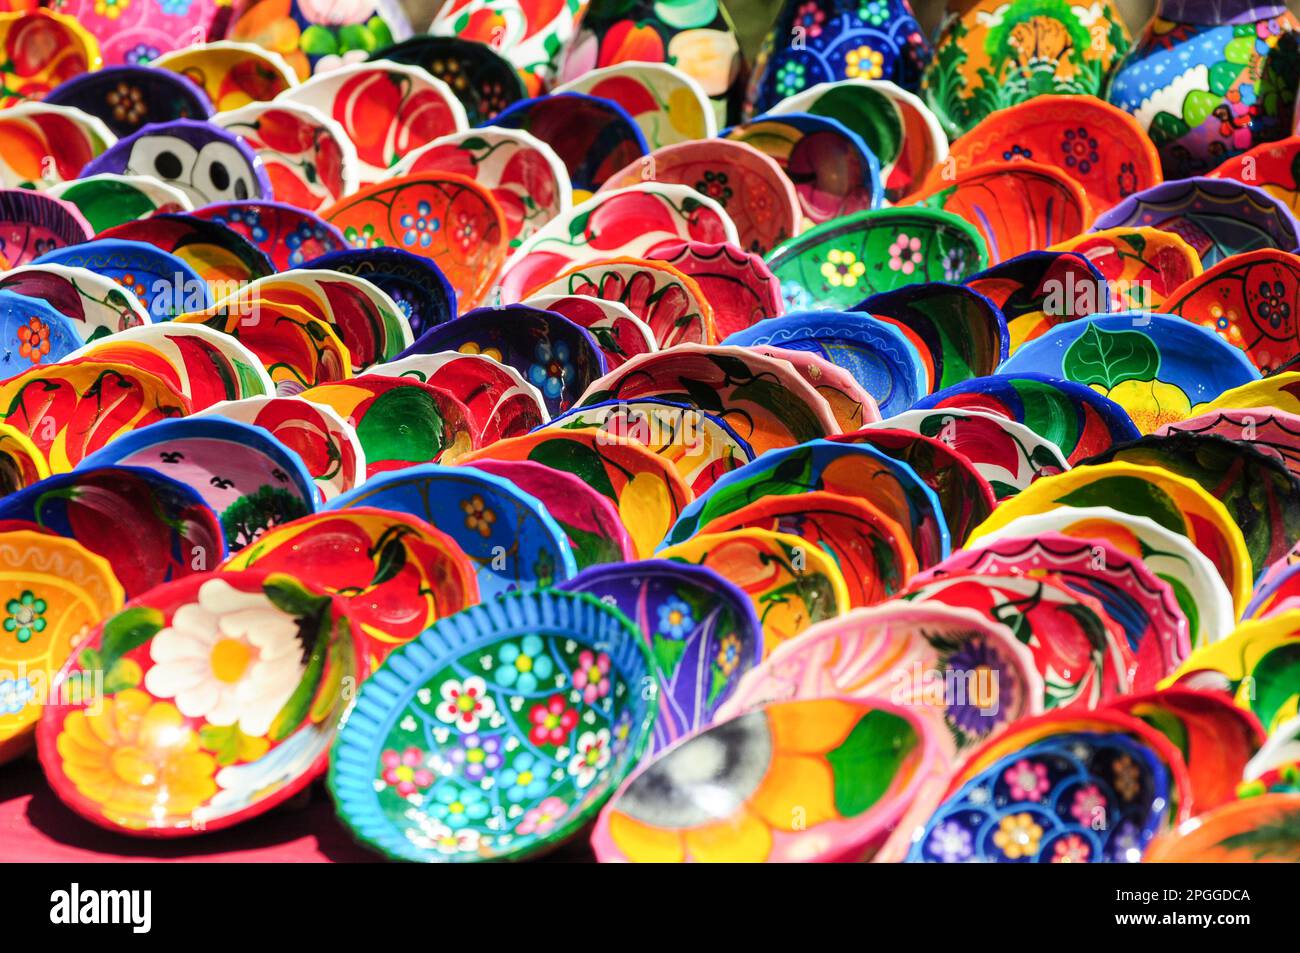 Multiple rows of multicolored hand painted saucers sold as souvenirs Stock Photo